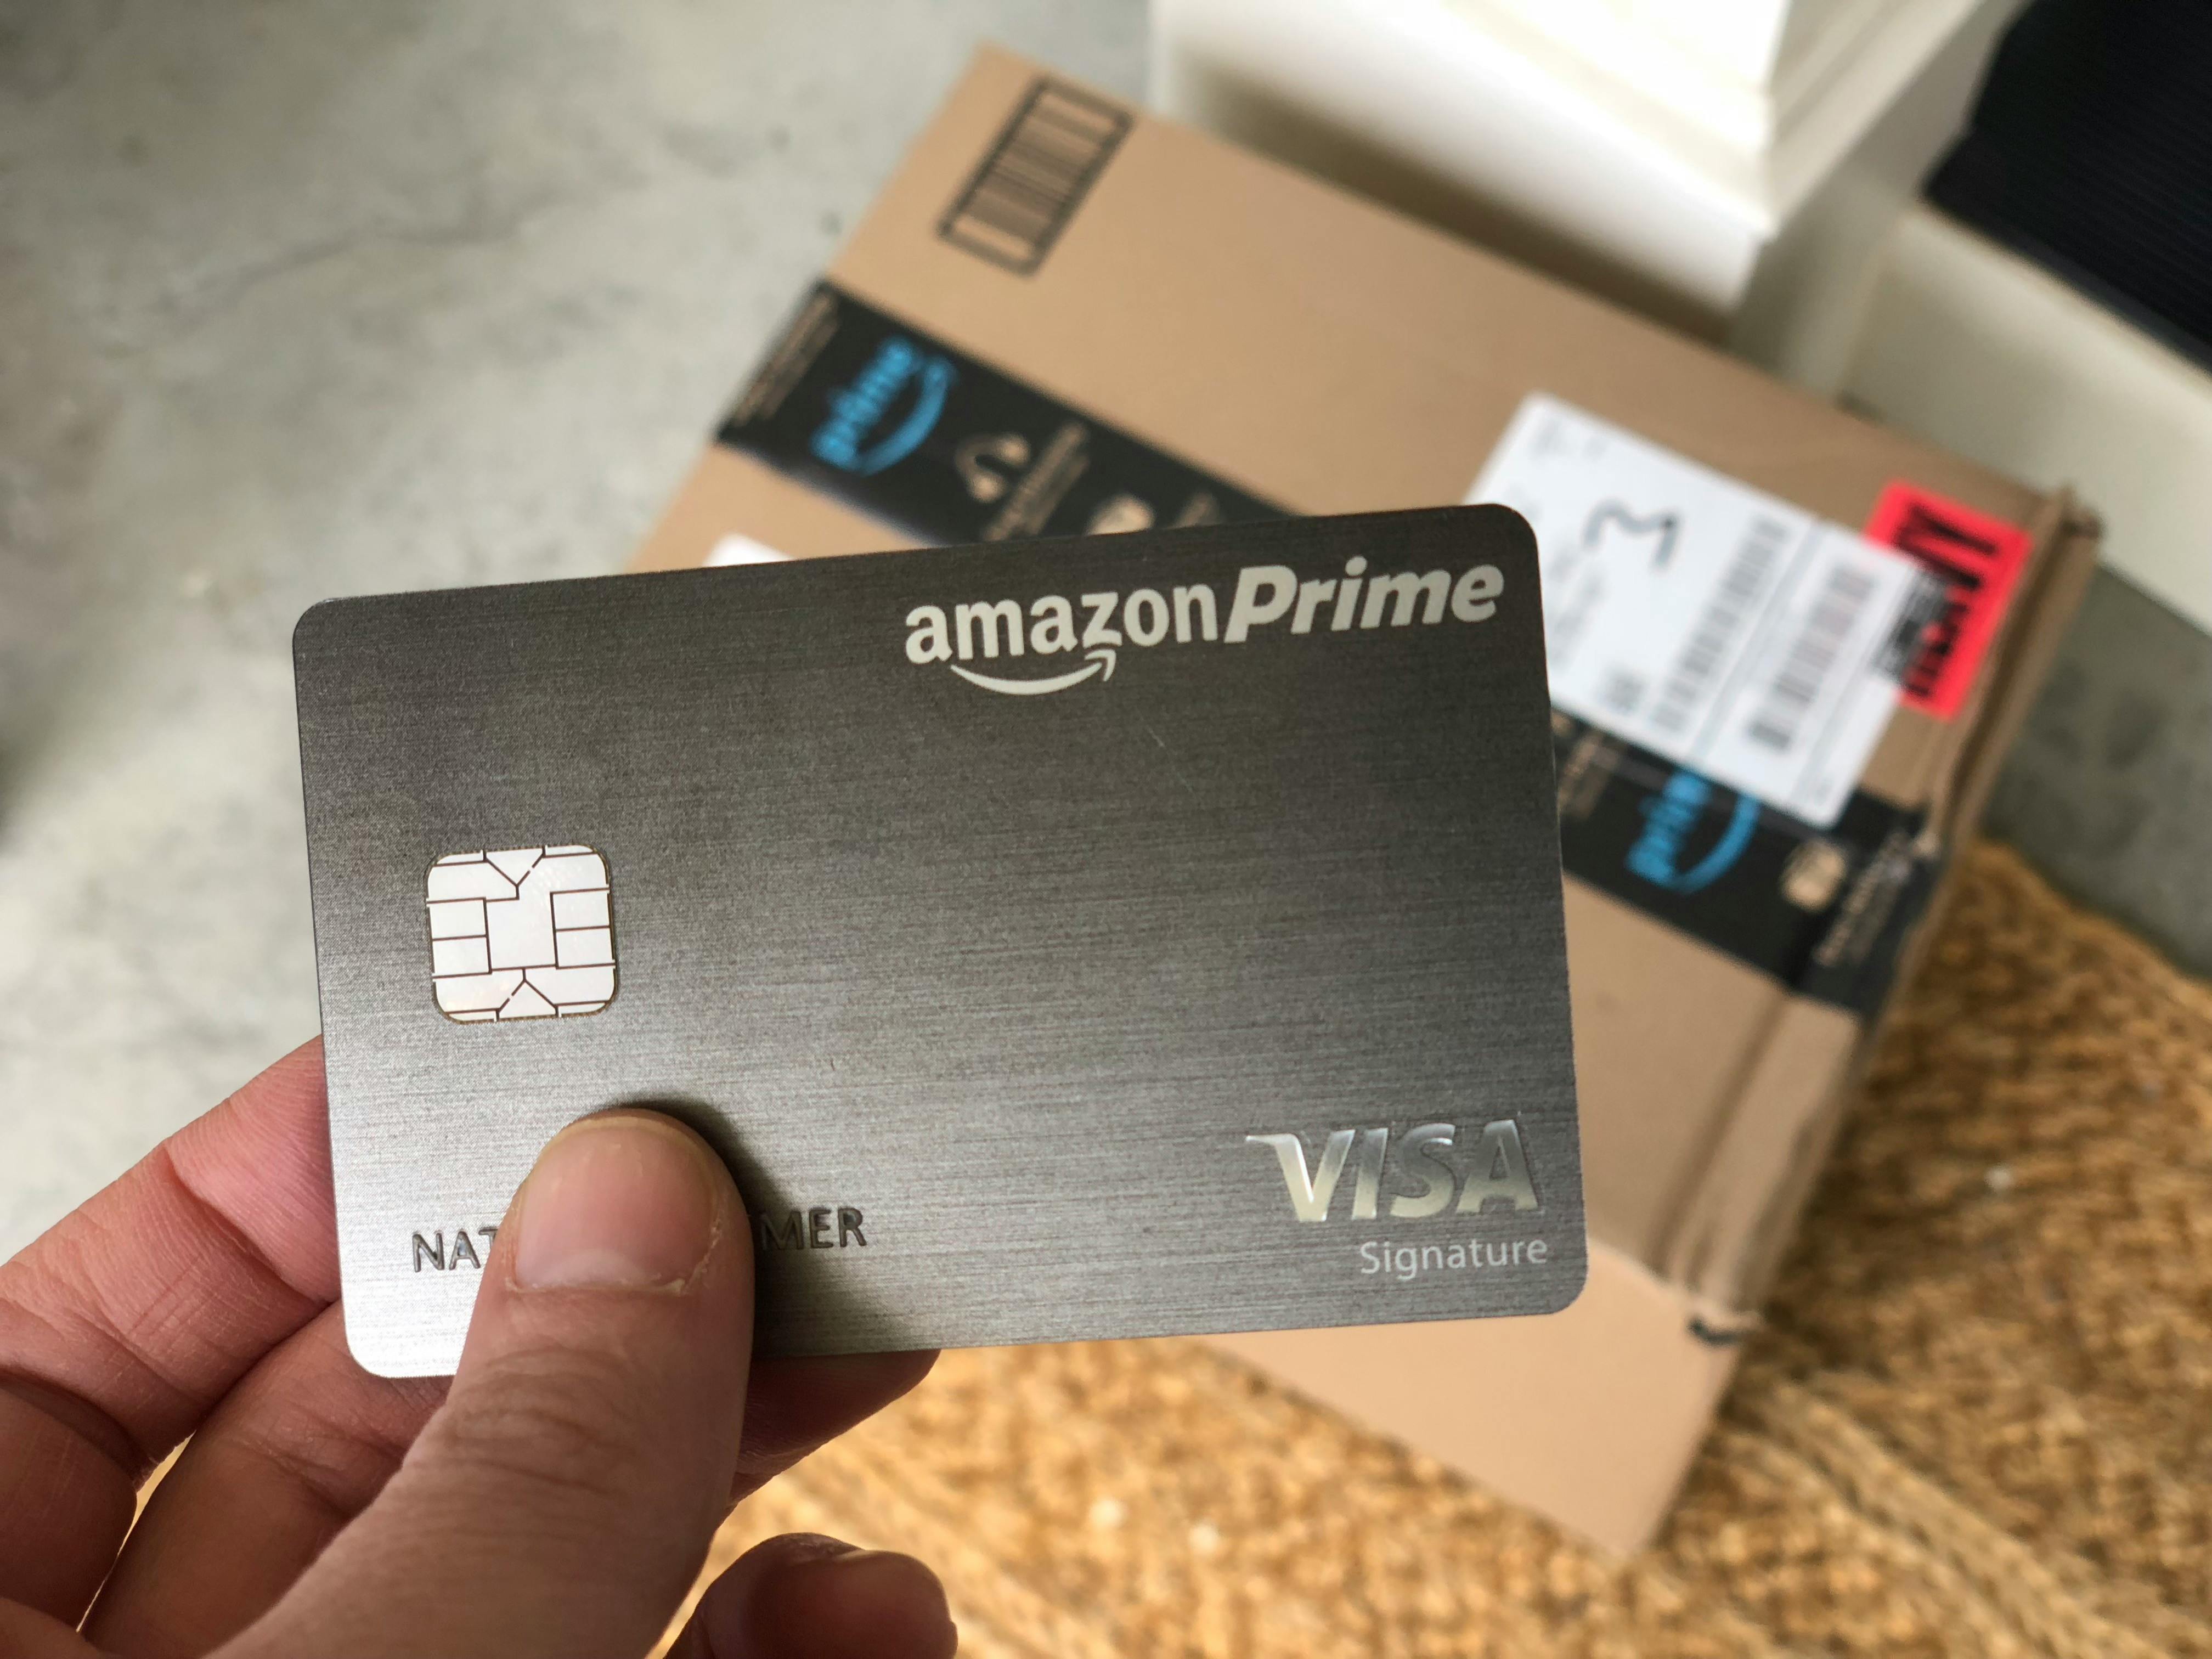 A person's hand holding up their Amazon Prime Visa credit card in front of an Amazon package on the floor.